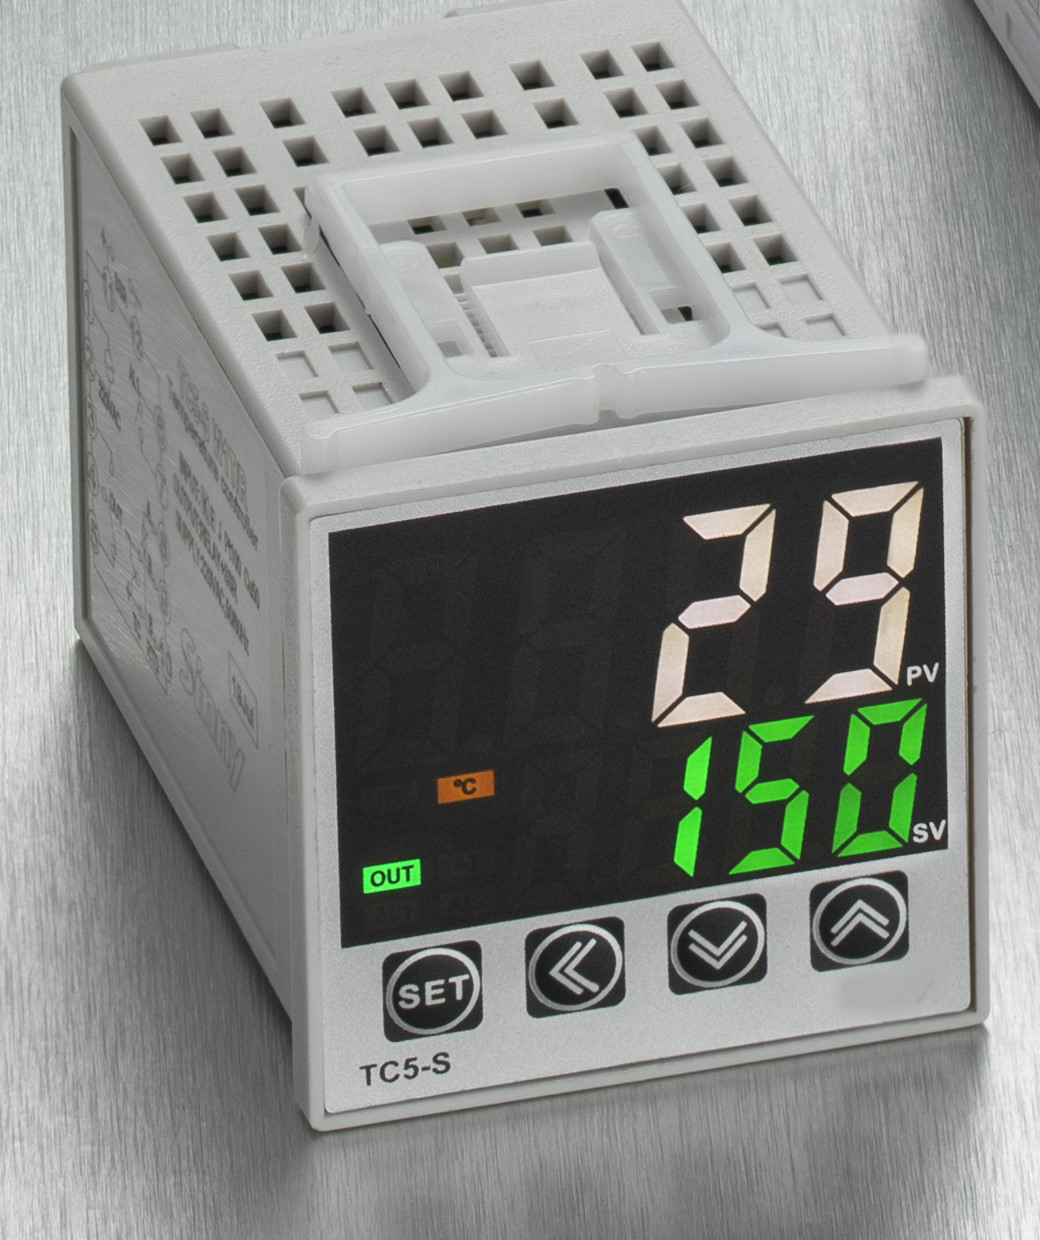 FC5-S-1A-2-G-2 PID Controller, 100-240VAC with 2 Relay Alarms, E,J,N,T,S,R,B Thermocouple, Linear Current/Voltage and  PT100/Cu20 RTD Input, 48x48mm,4-20mA Output